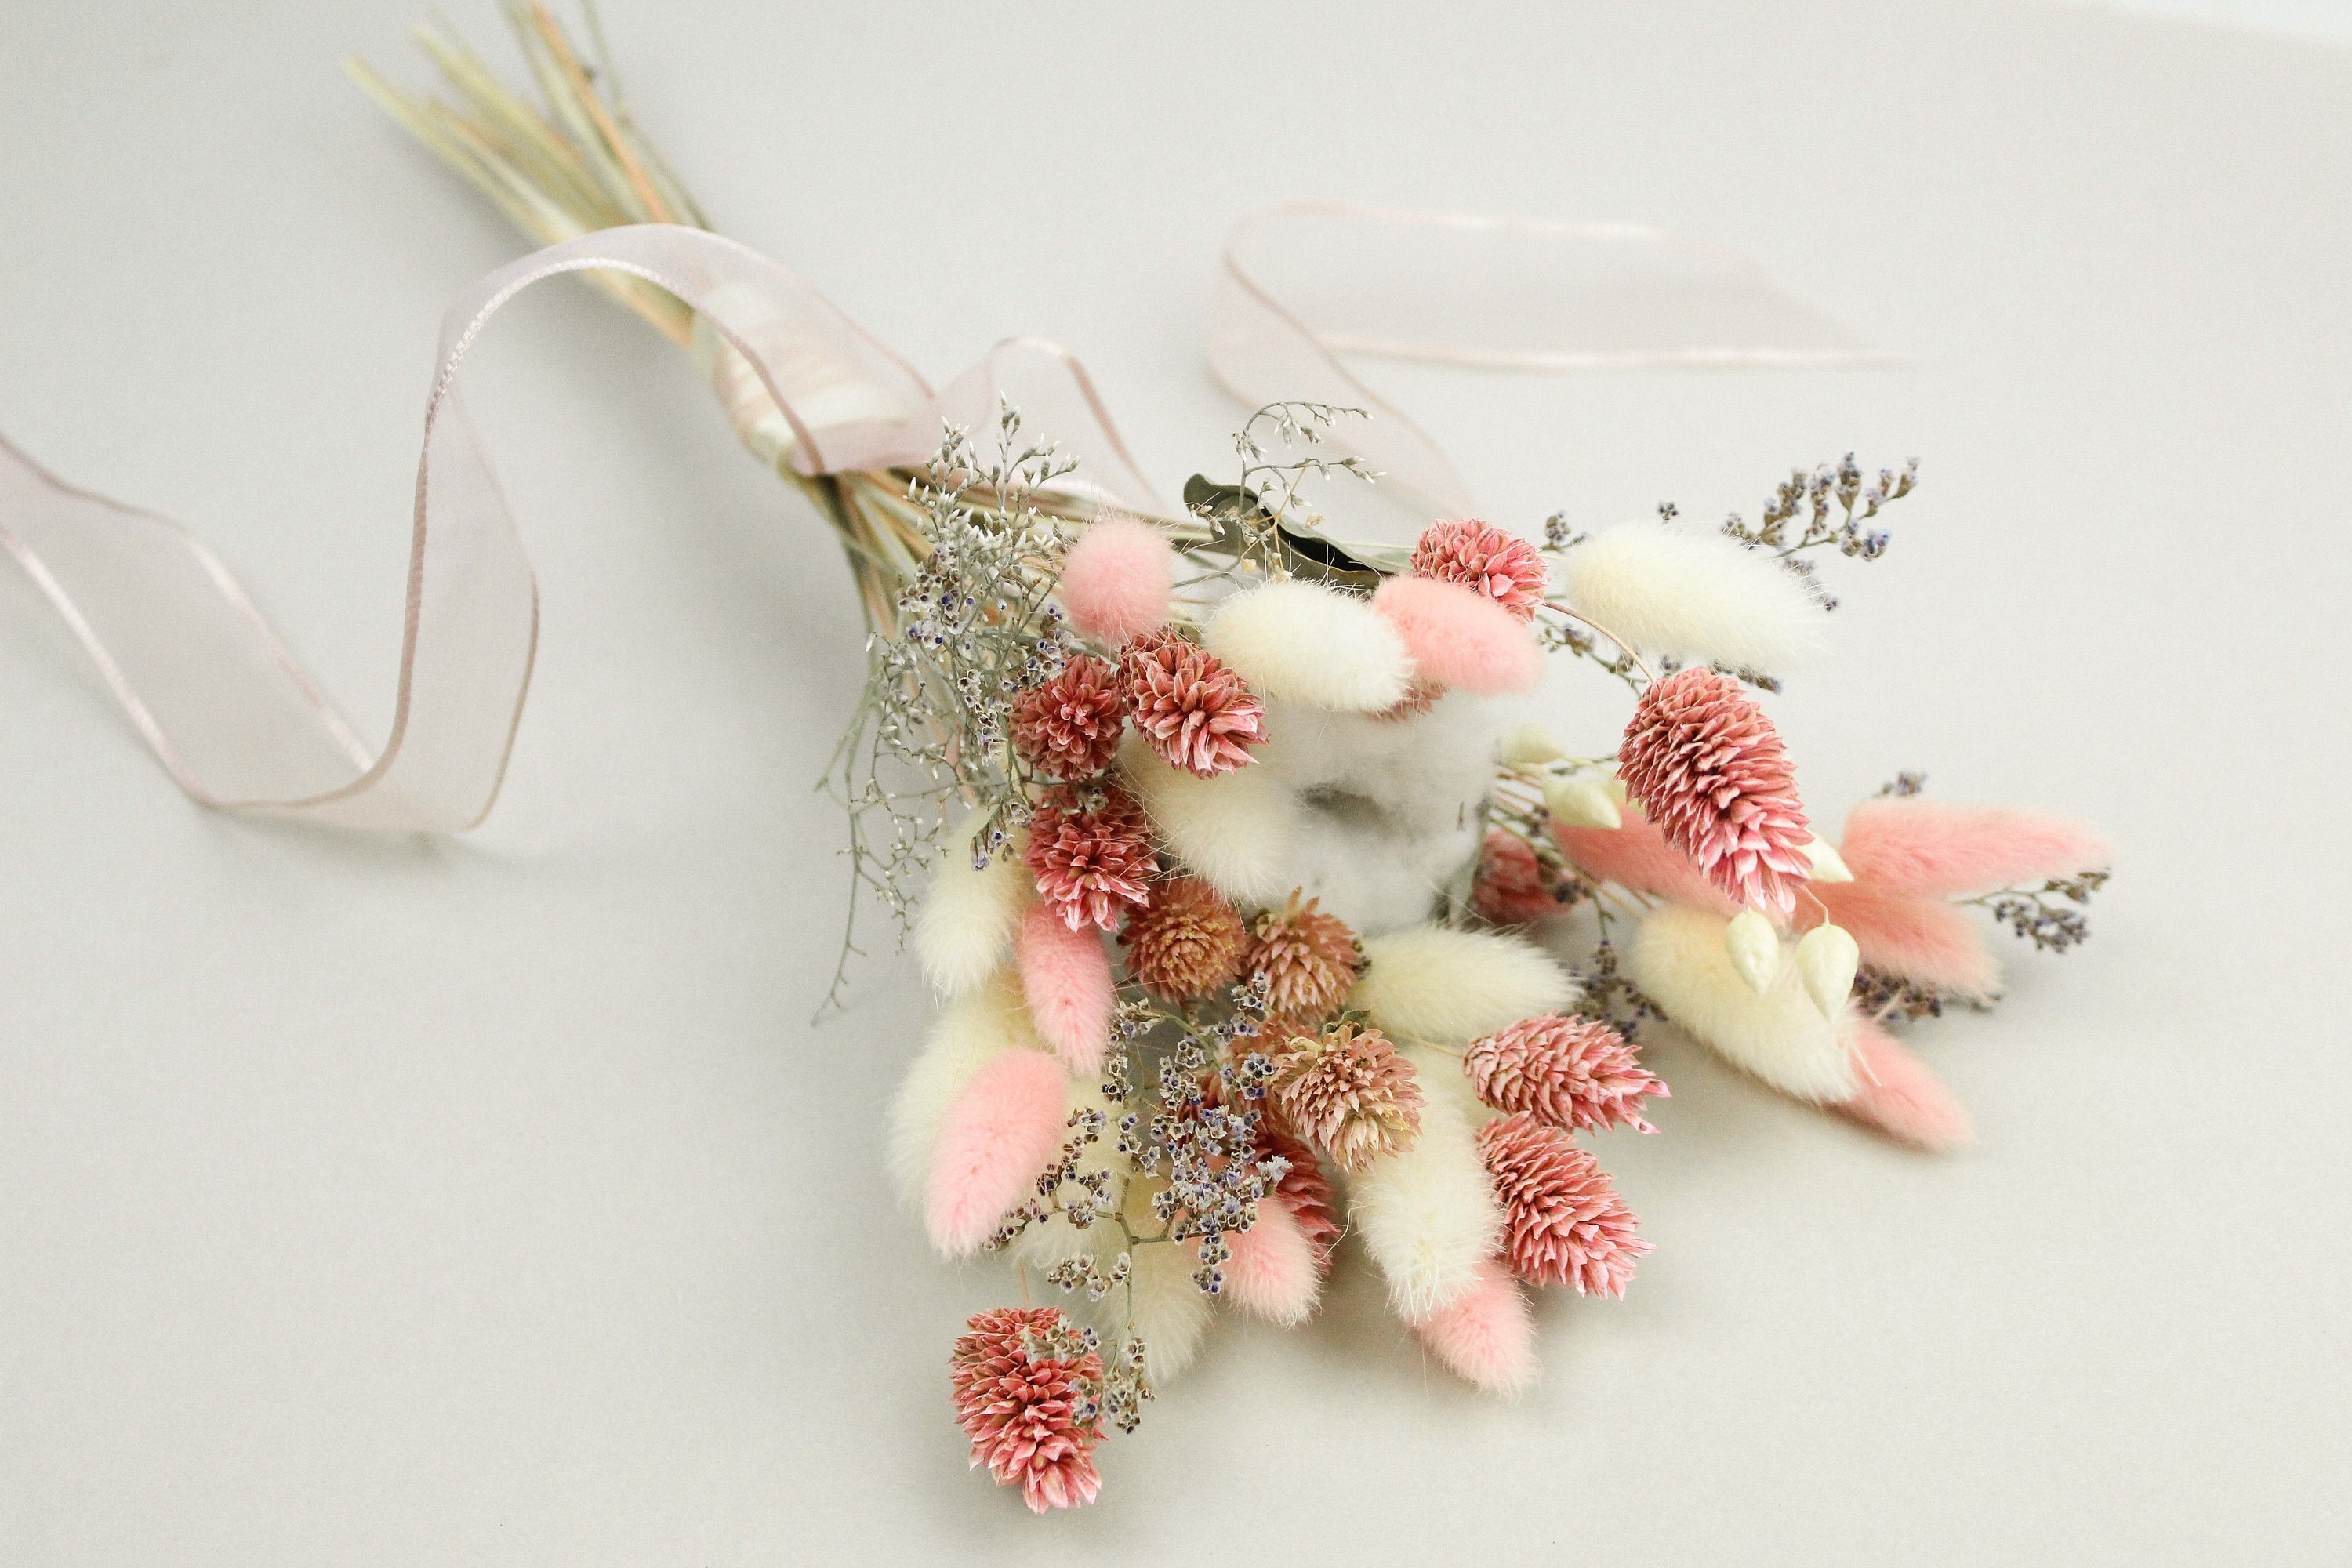 Wedding Bouquet Set, Pink and White Dried Flower Bouquet, Bridal and Dridesmaids Bouquet, Wedding Flowers, Boutonniere and Corsage Set